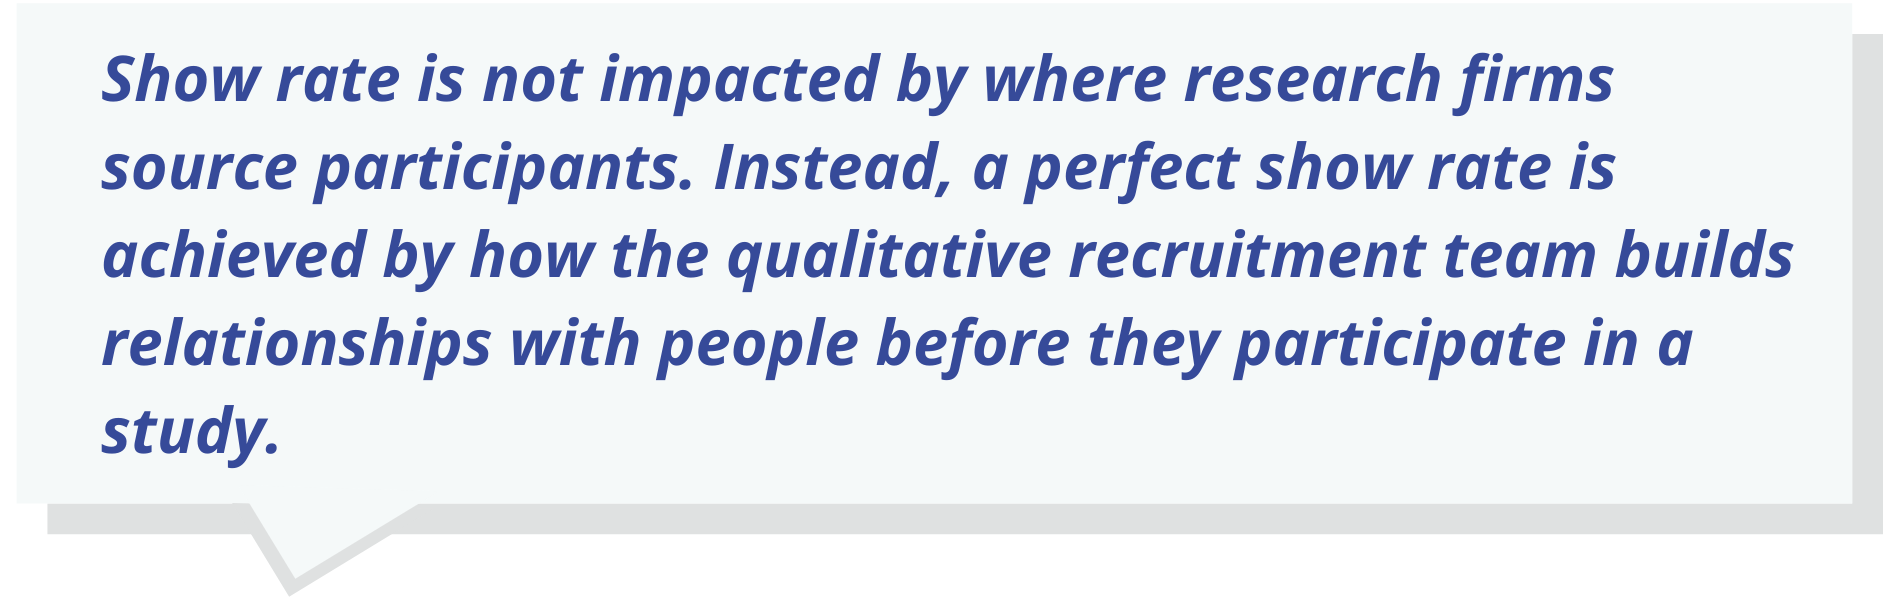 Show rate is not impacted by where research firms source participants. Instead, a perfect show rate is achieved by how the qualitative recruitment team builds relationships with people before they participate in a study.